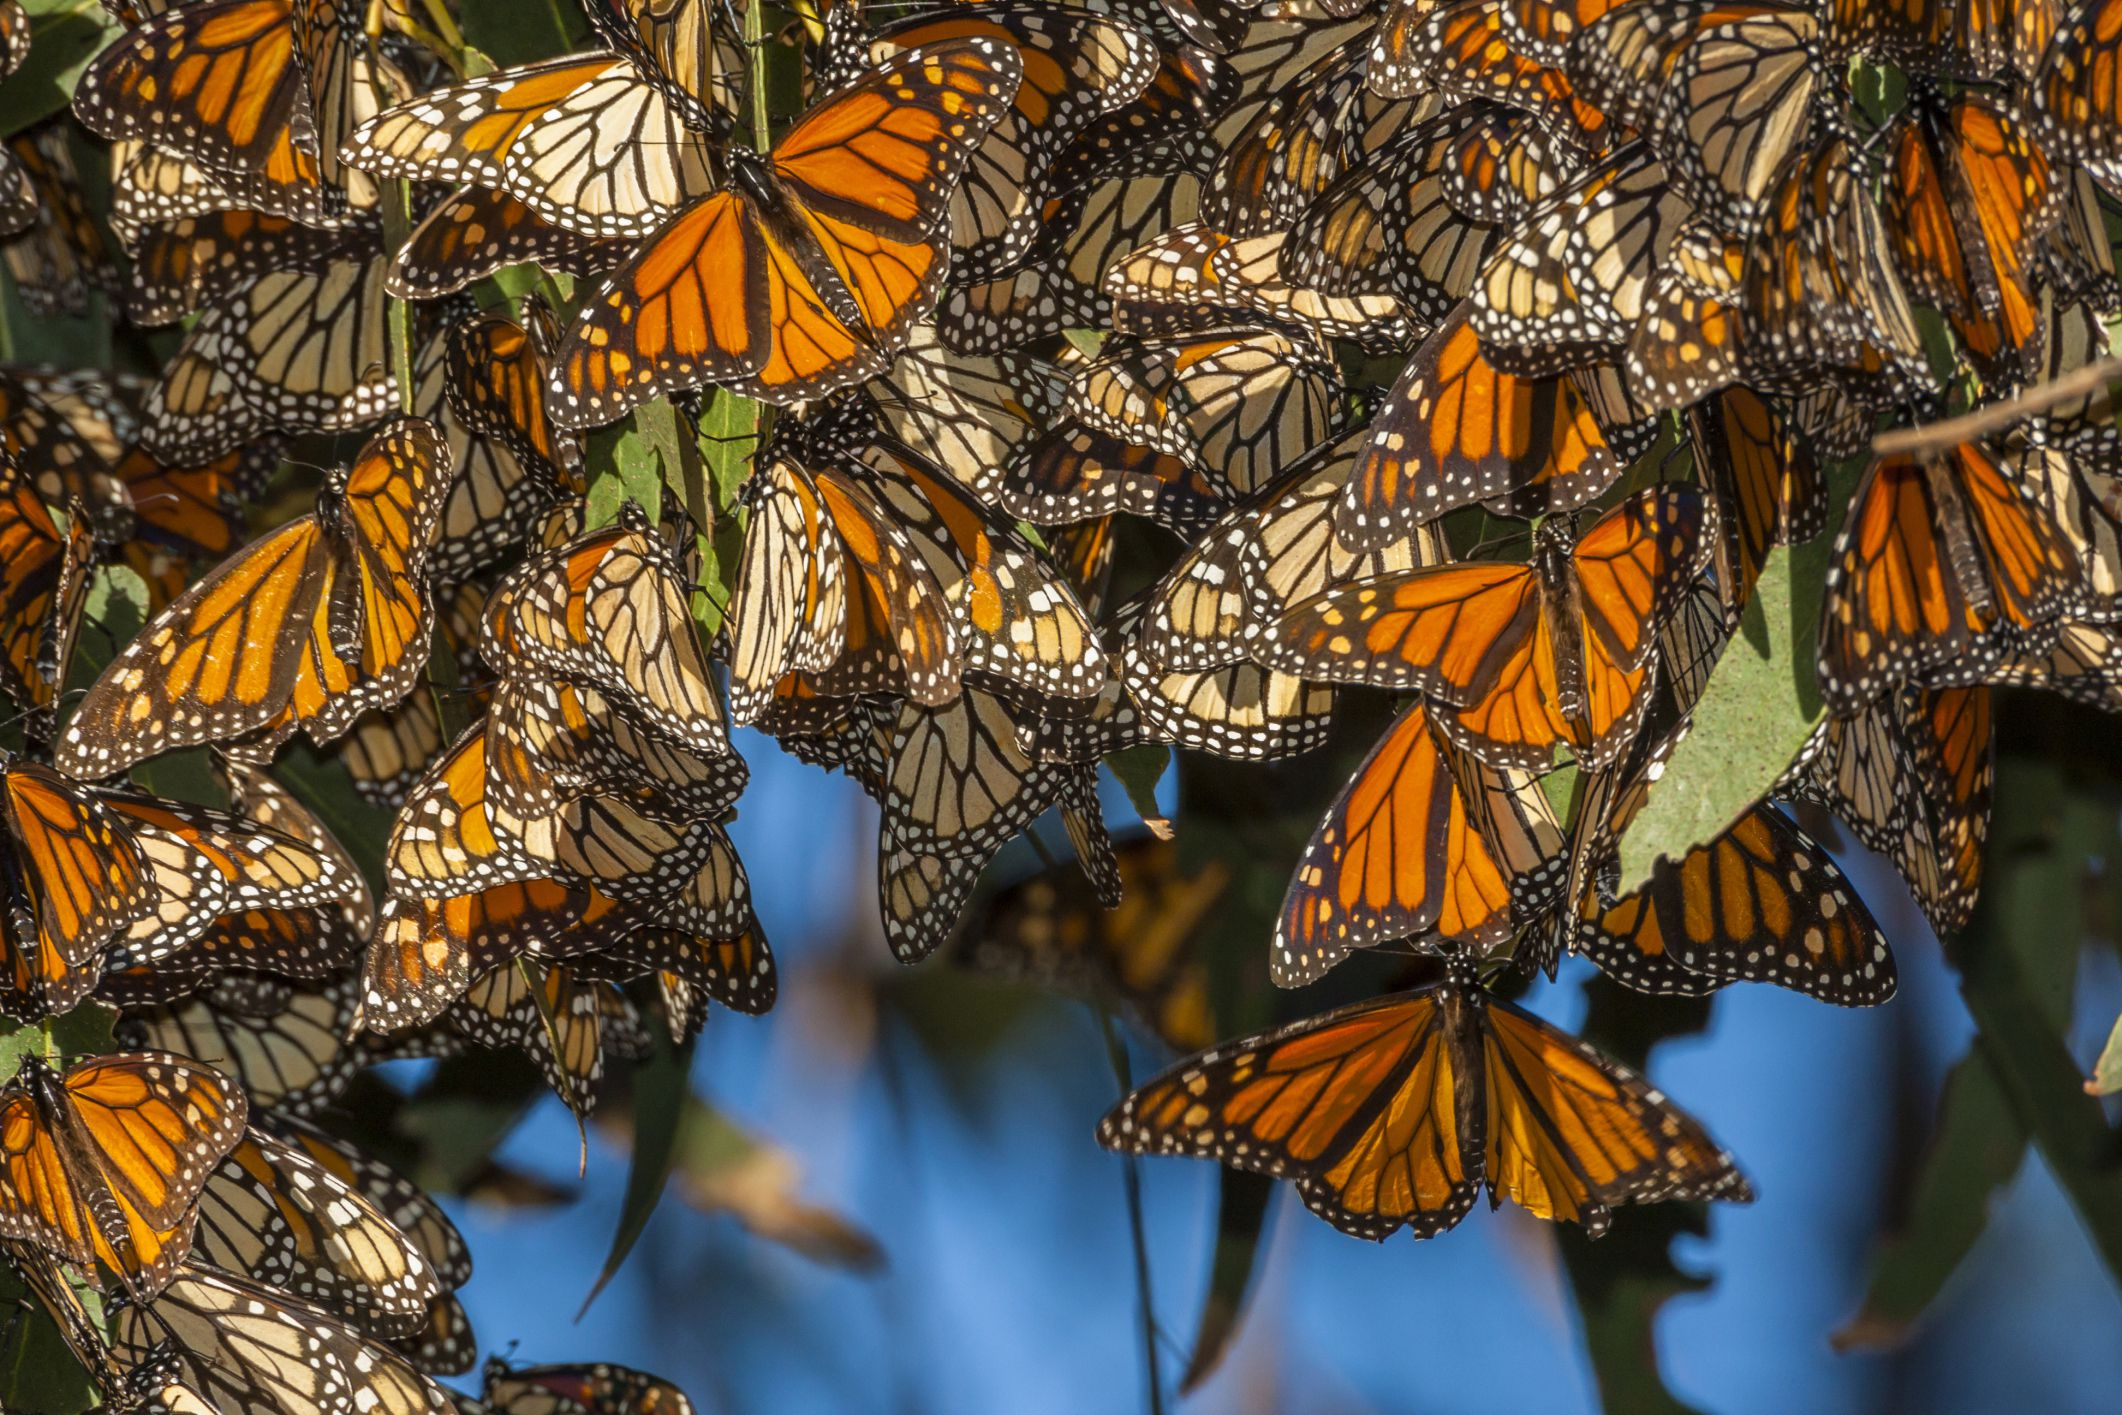 Where To See The Monarch Butterflies In California - Monarch Butterfly Migration Map California